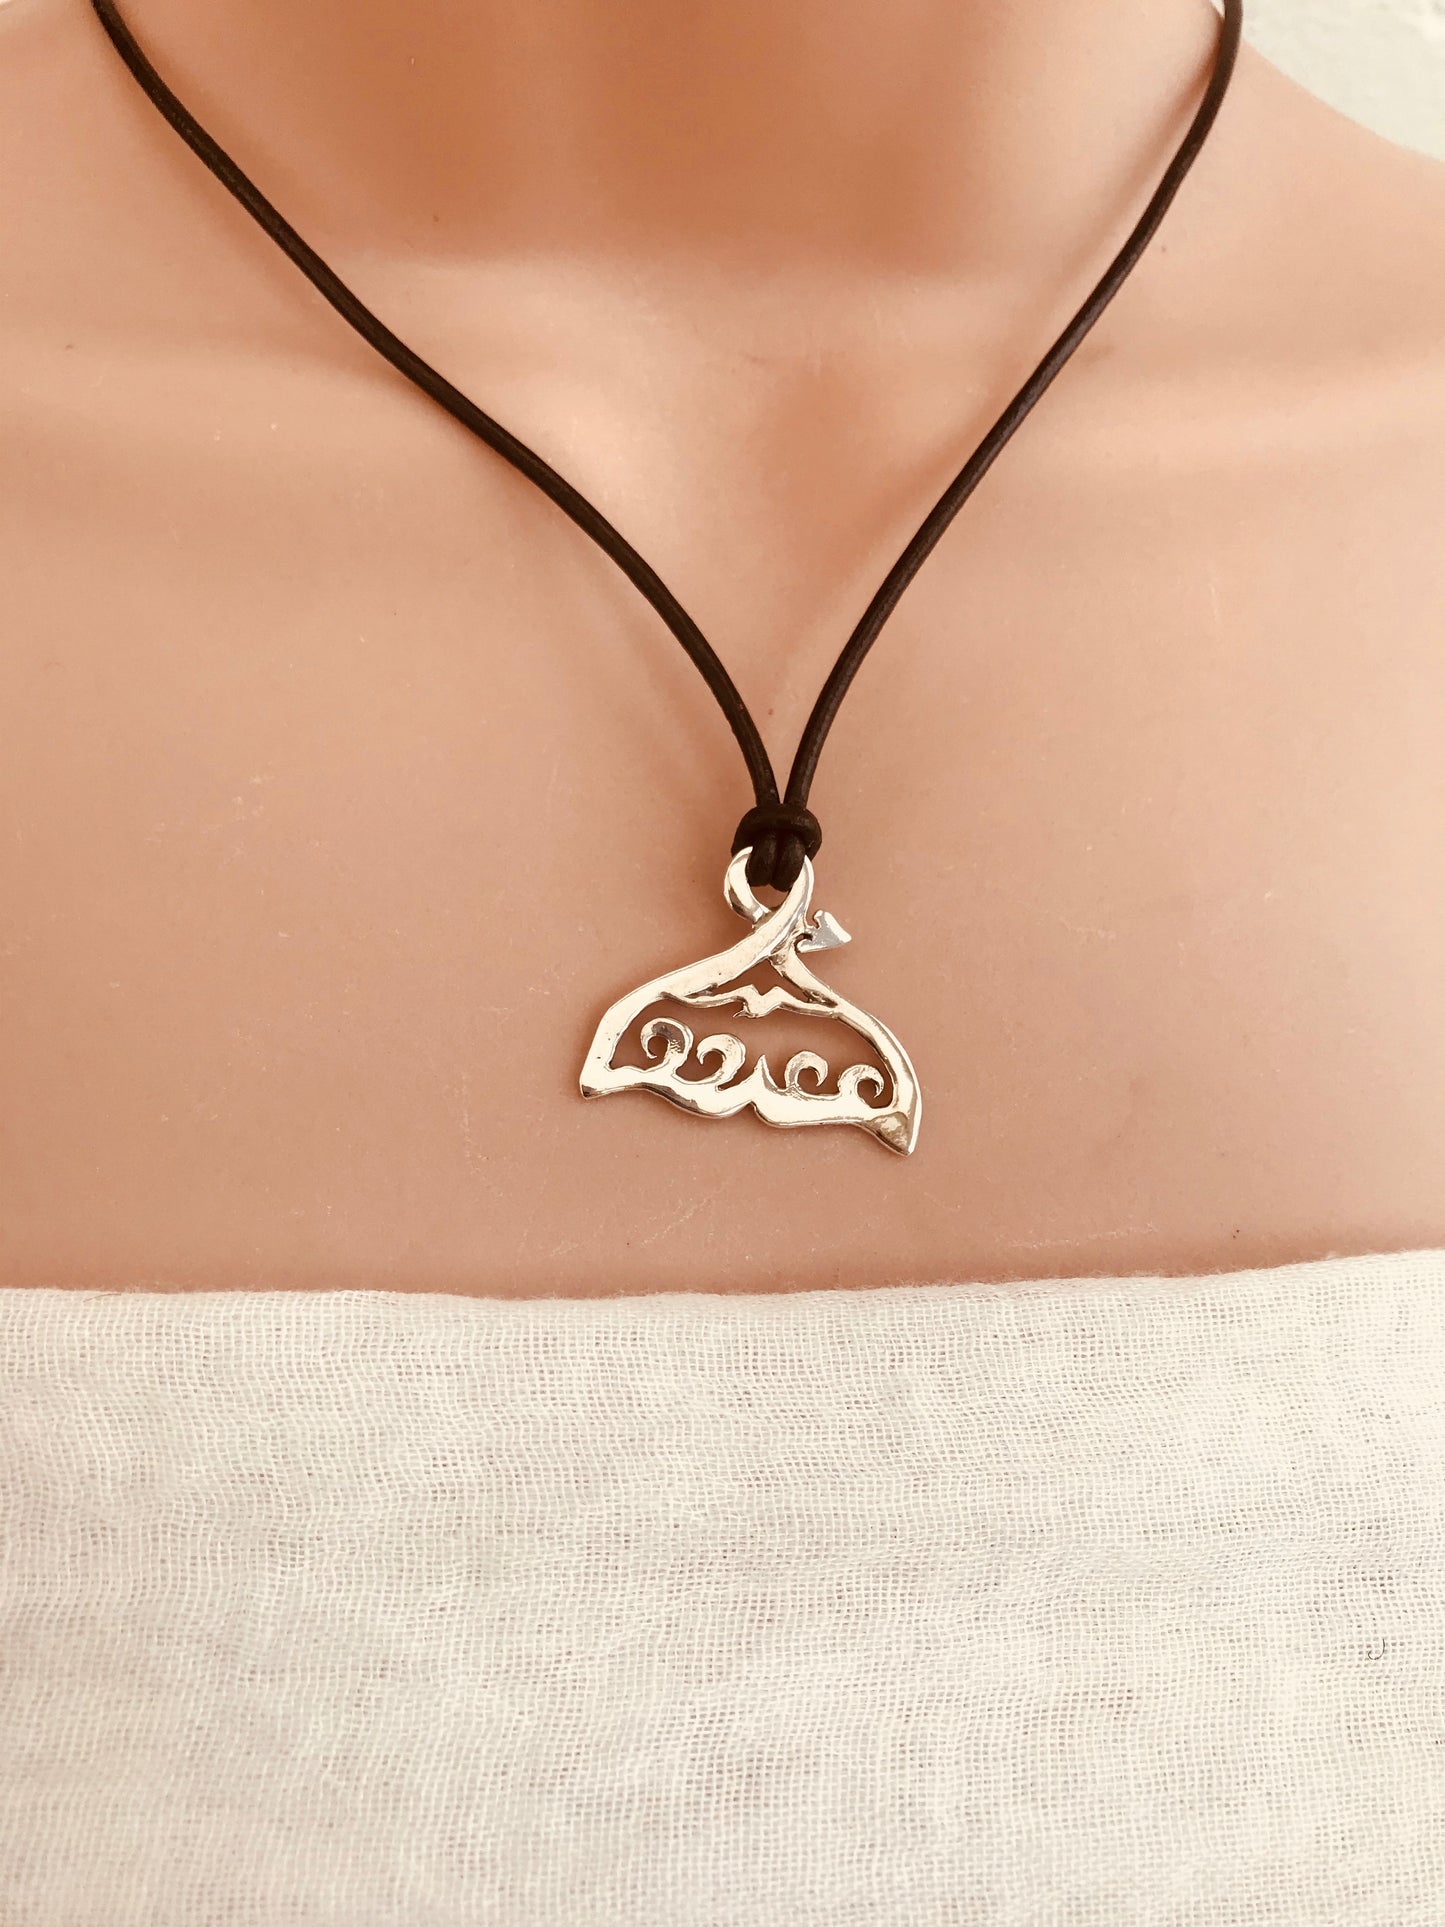 Whale tail necklace